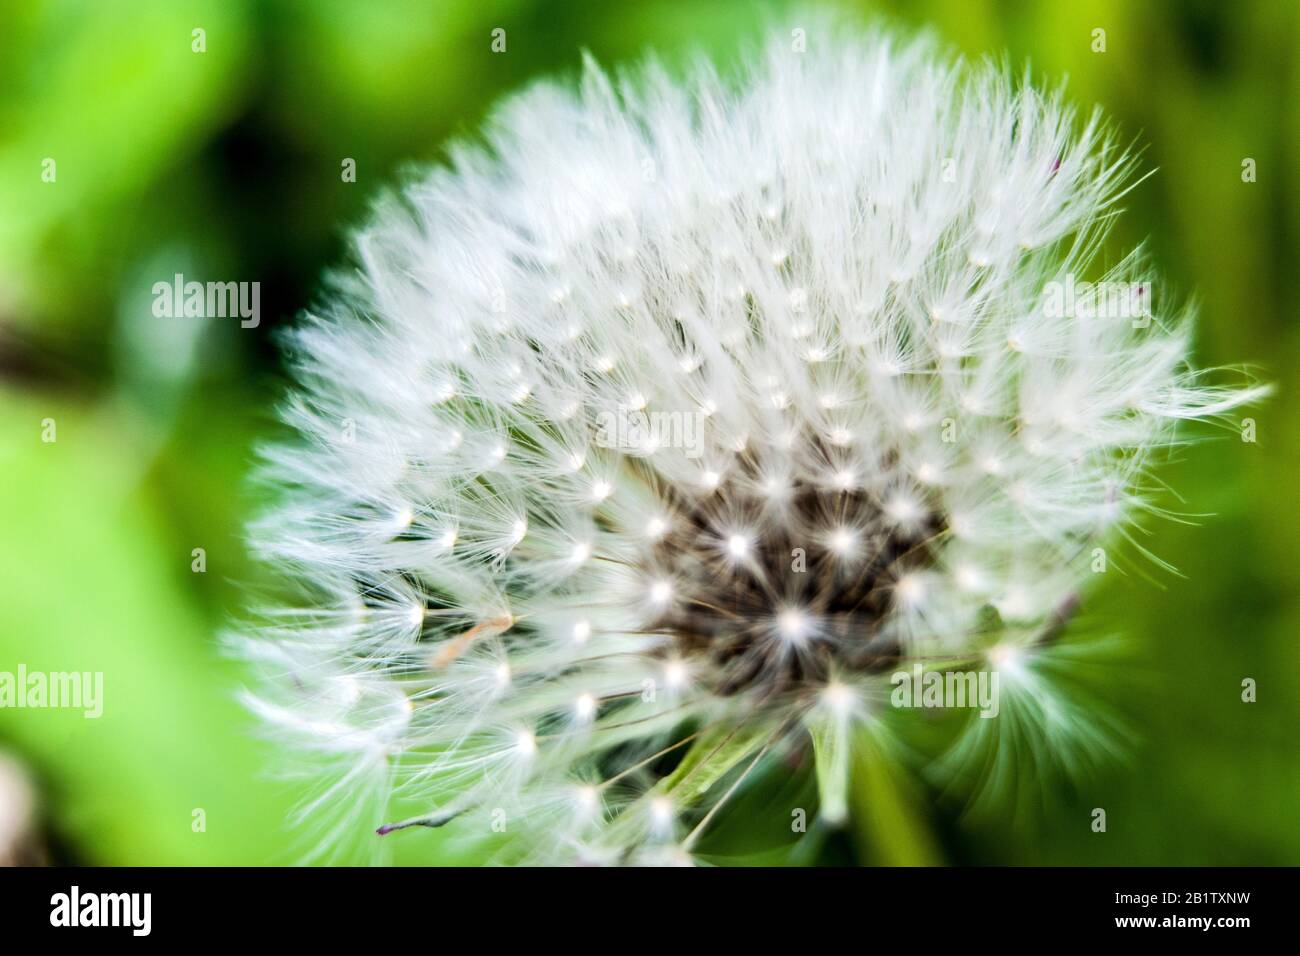 Dandelion with seeds, close up shoot Stock Photo